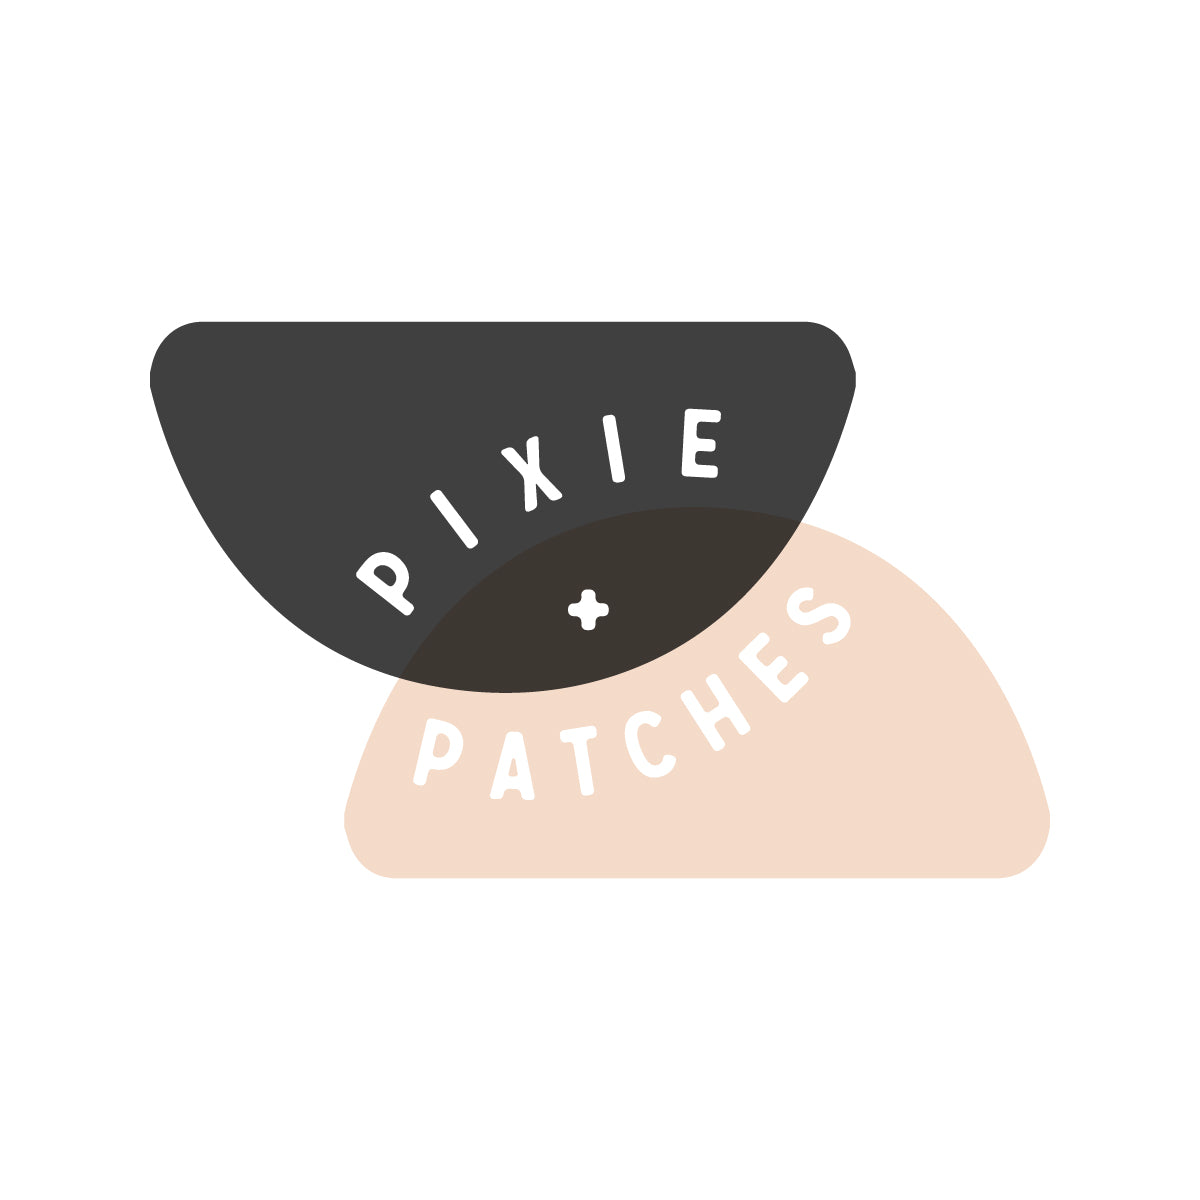 Pixie + Patches